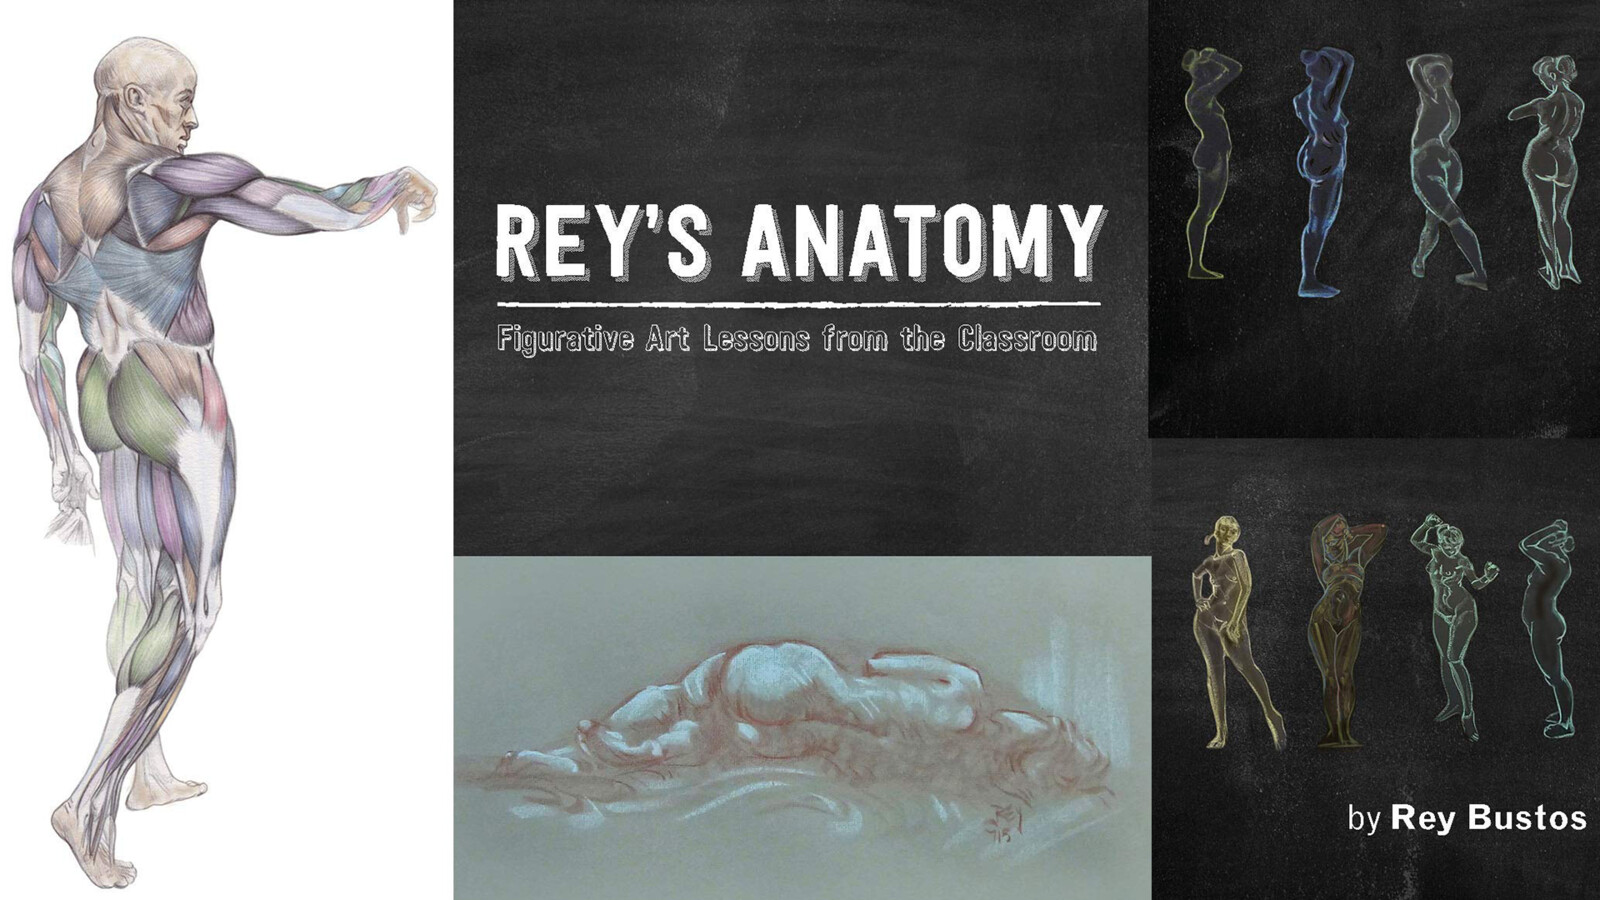 Go buy the book today
https://www.amazon.com/Reys-Anatomy-Figurative-Lessons-Classroom/dp/1624650473